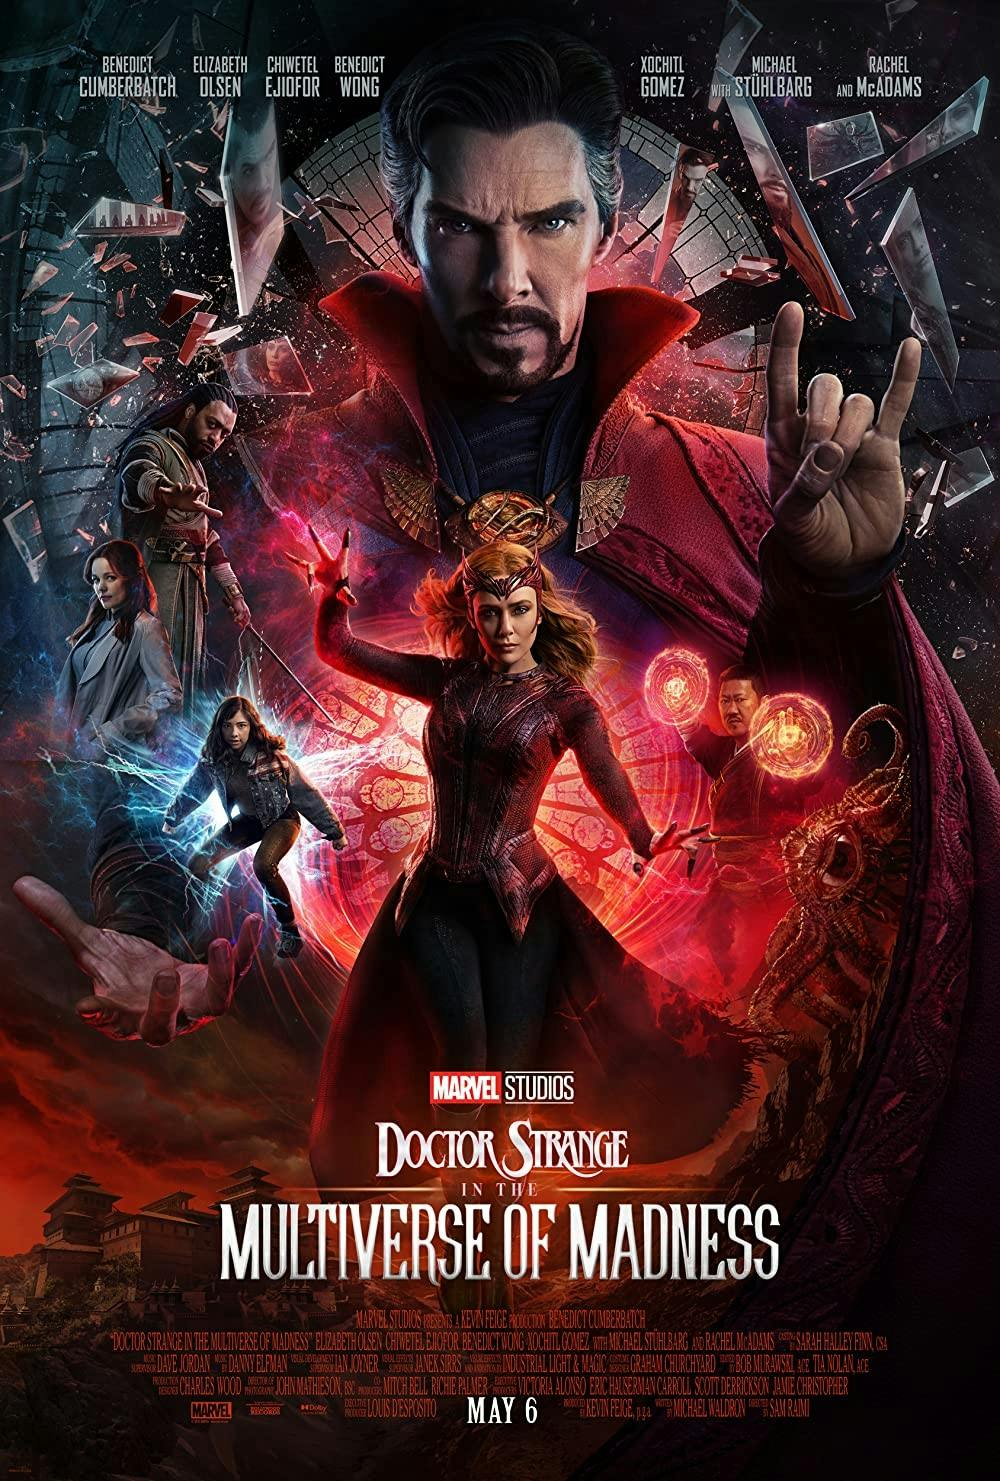 Review: ‘Doctor Strange in the Multiverse of Madness’ truly puts the mad in madness